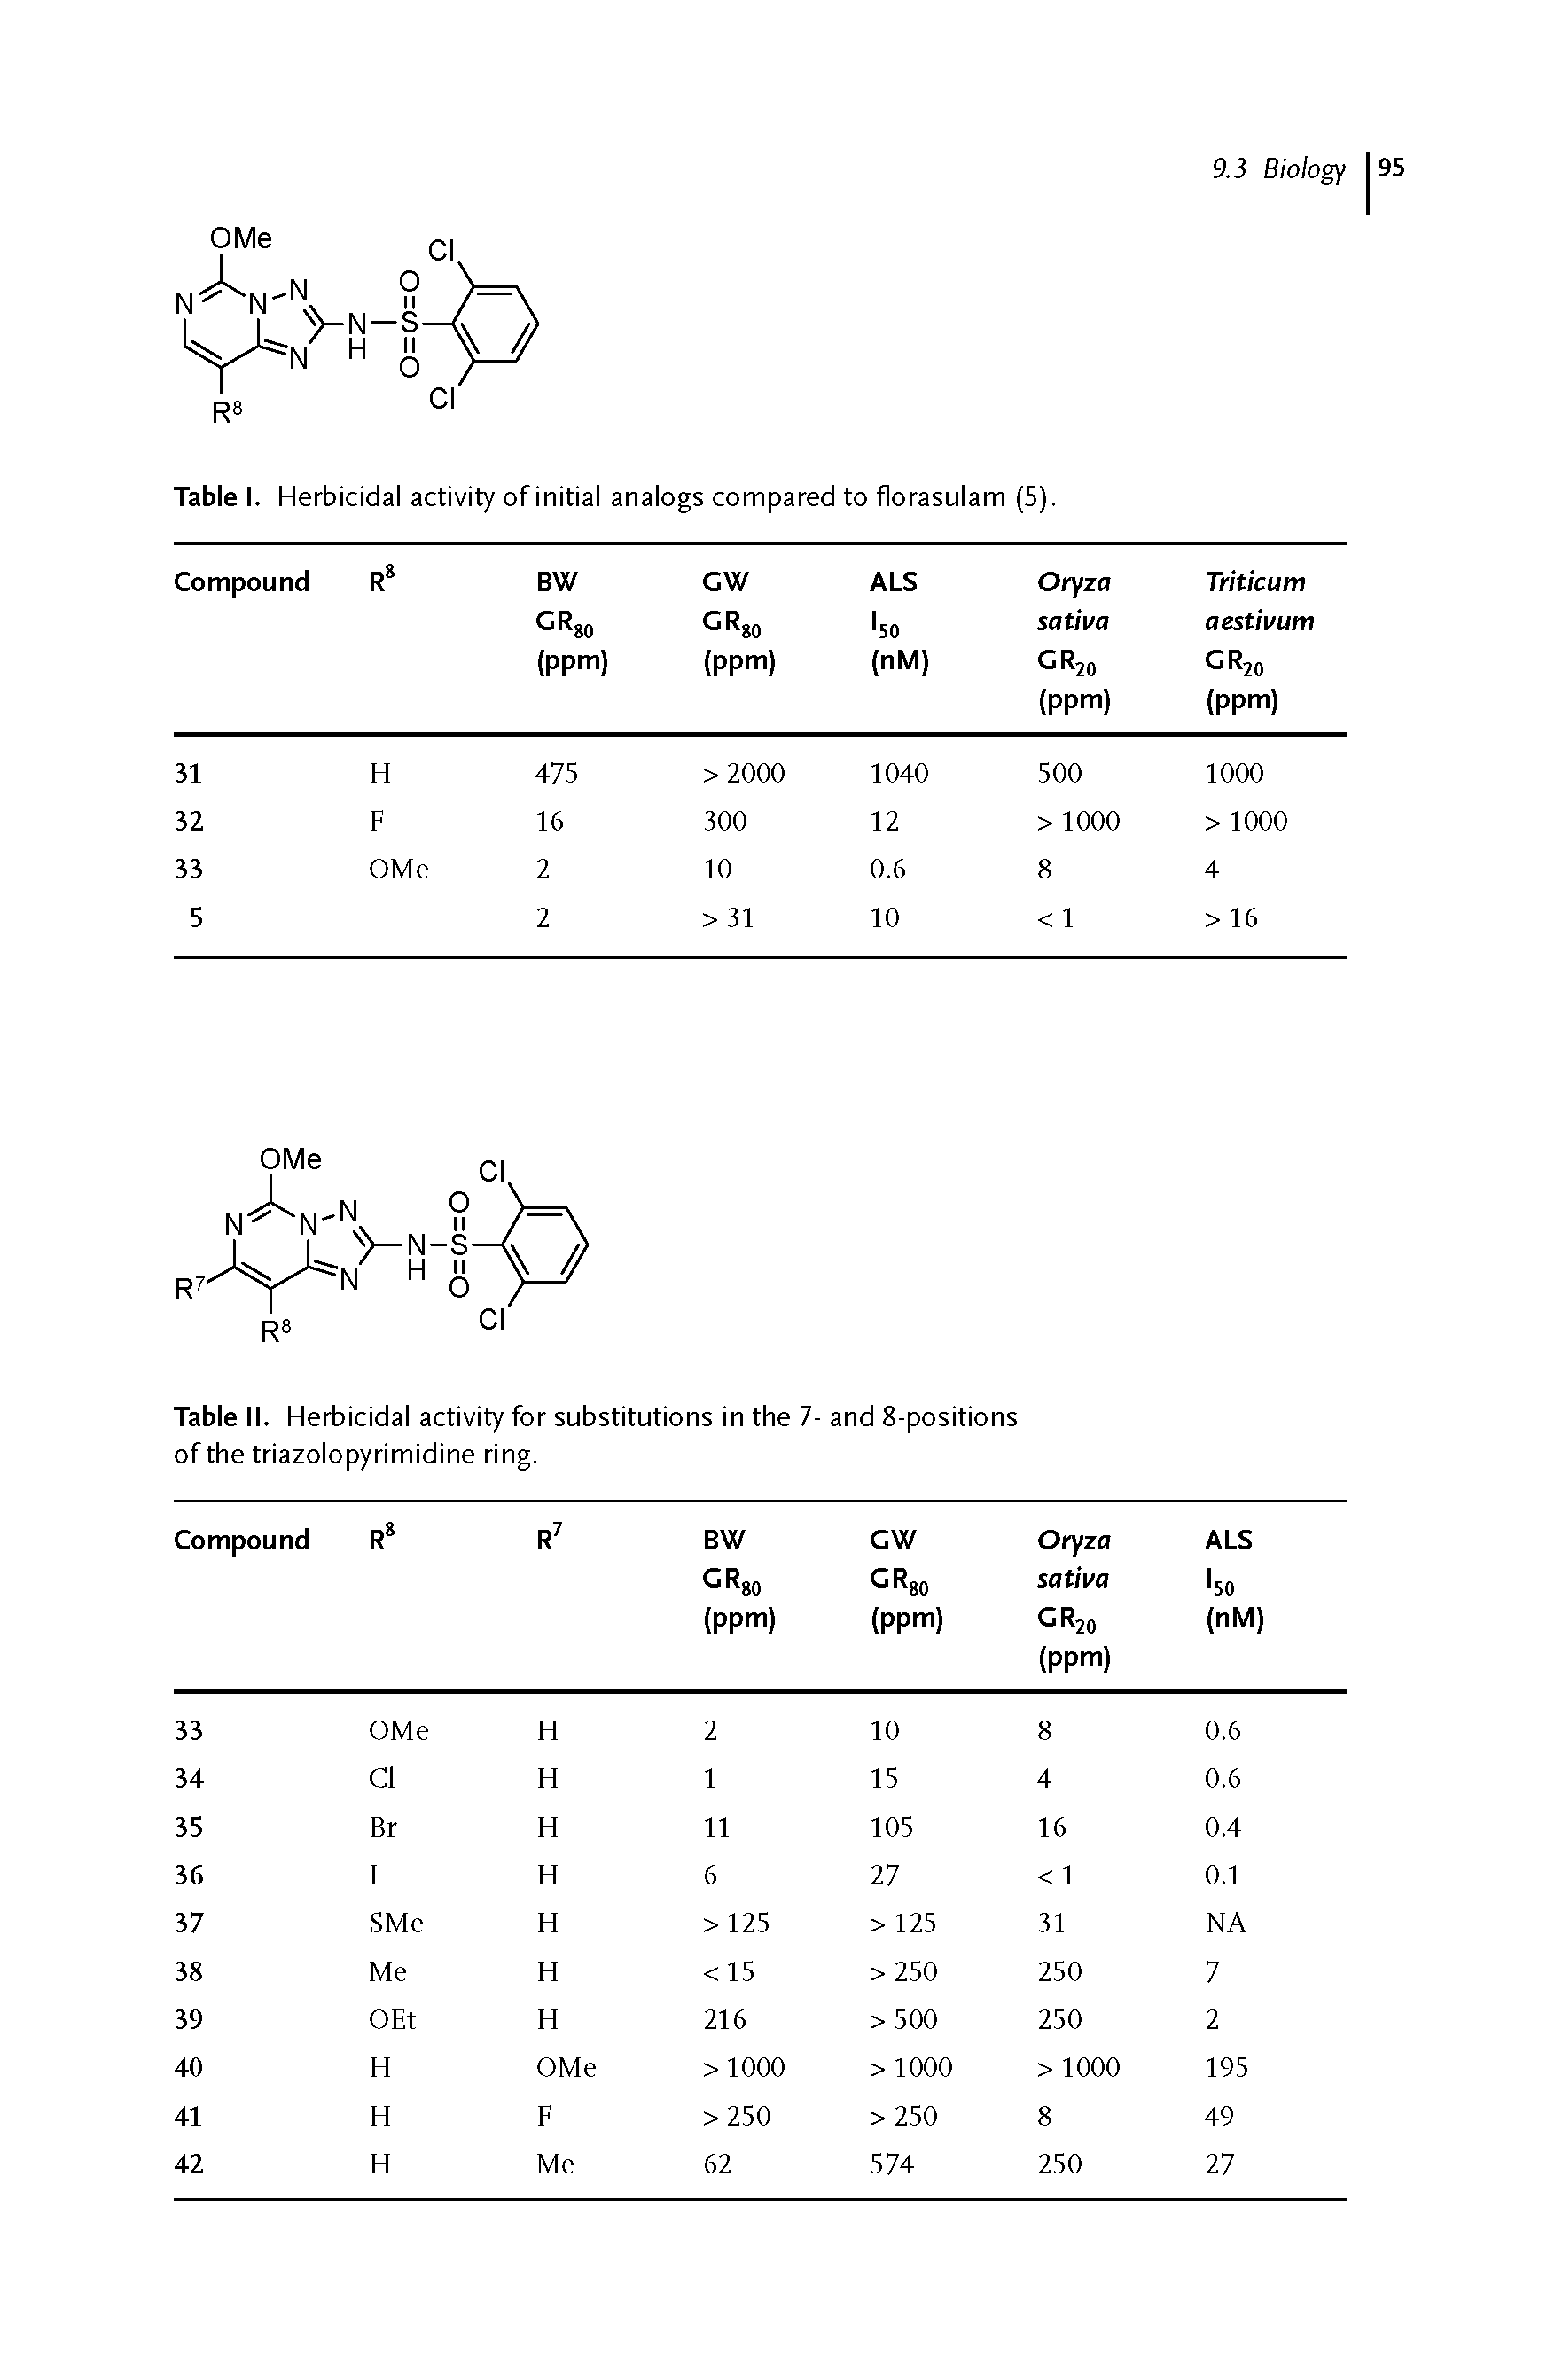 Table I. Herbicidal activity of initial analogs compared to florasulam (5).